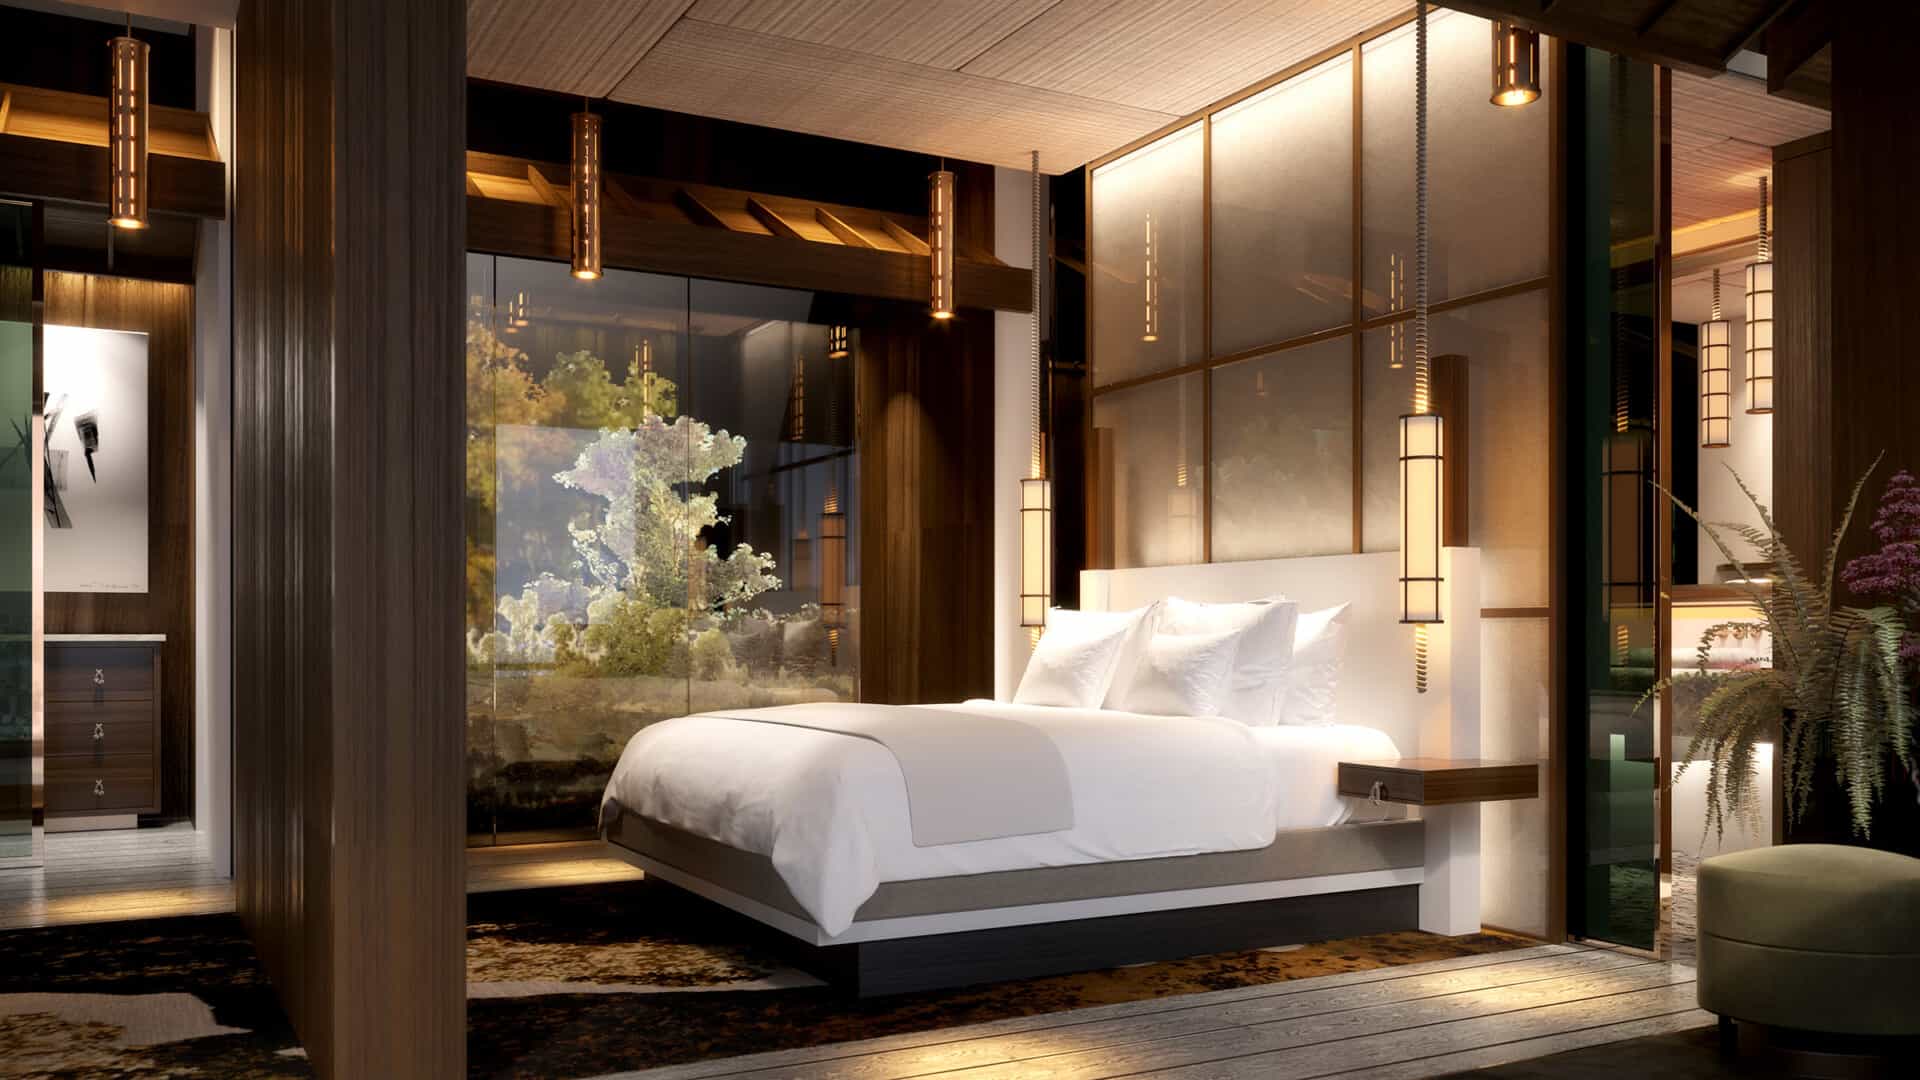 A design image of a guest room in the new hotel